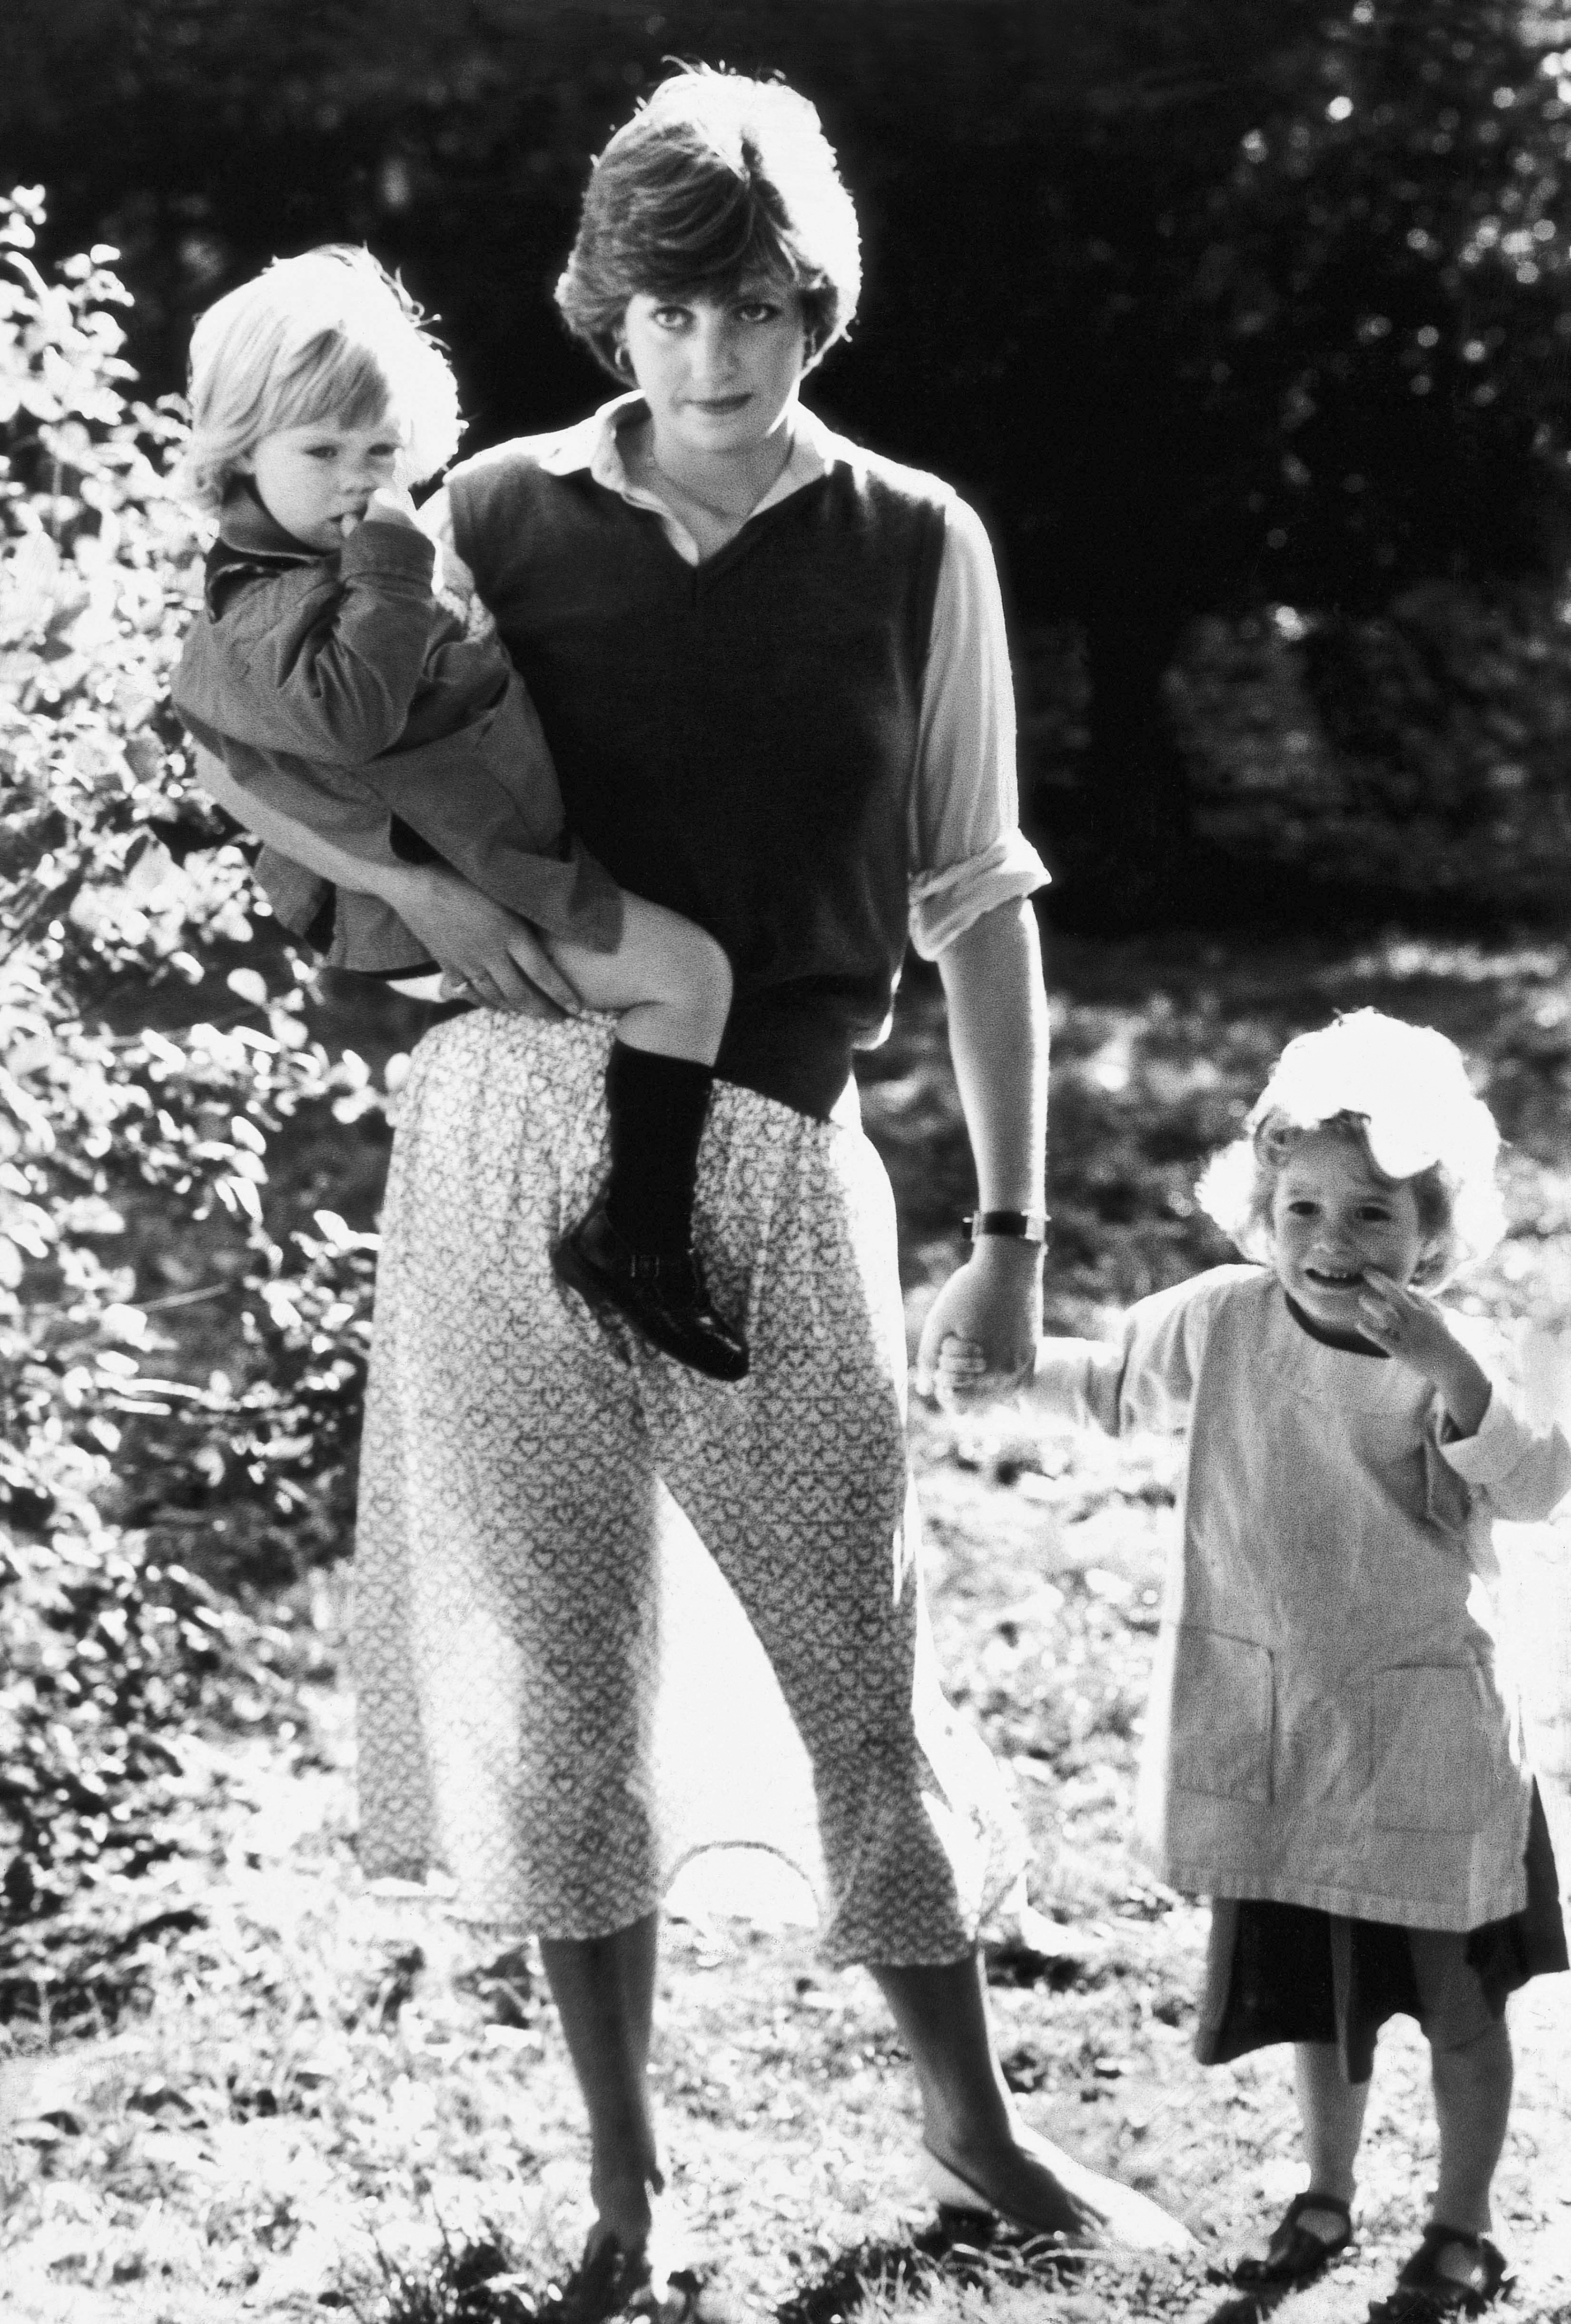 A black and white portrait of Diana wearing a long dress and a boat skirt with two children